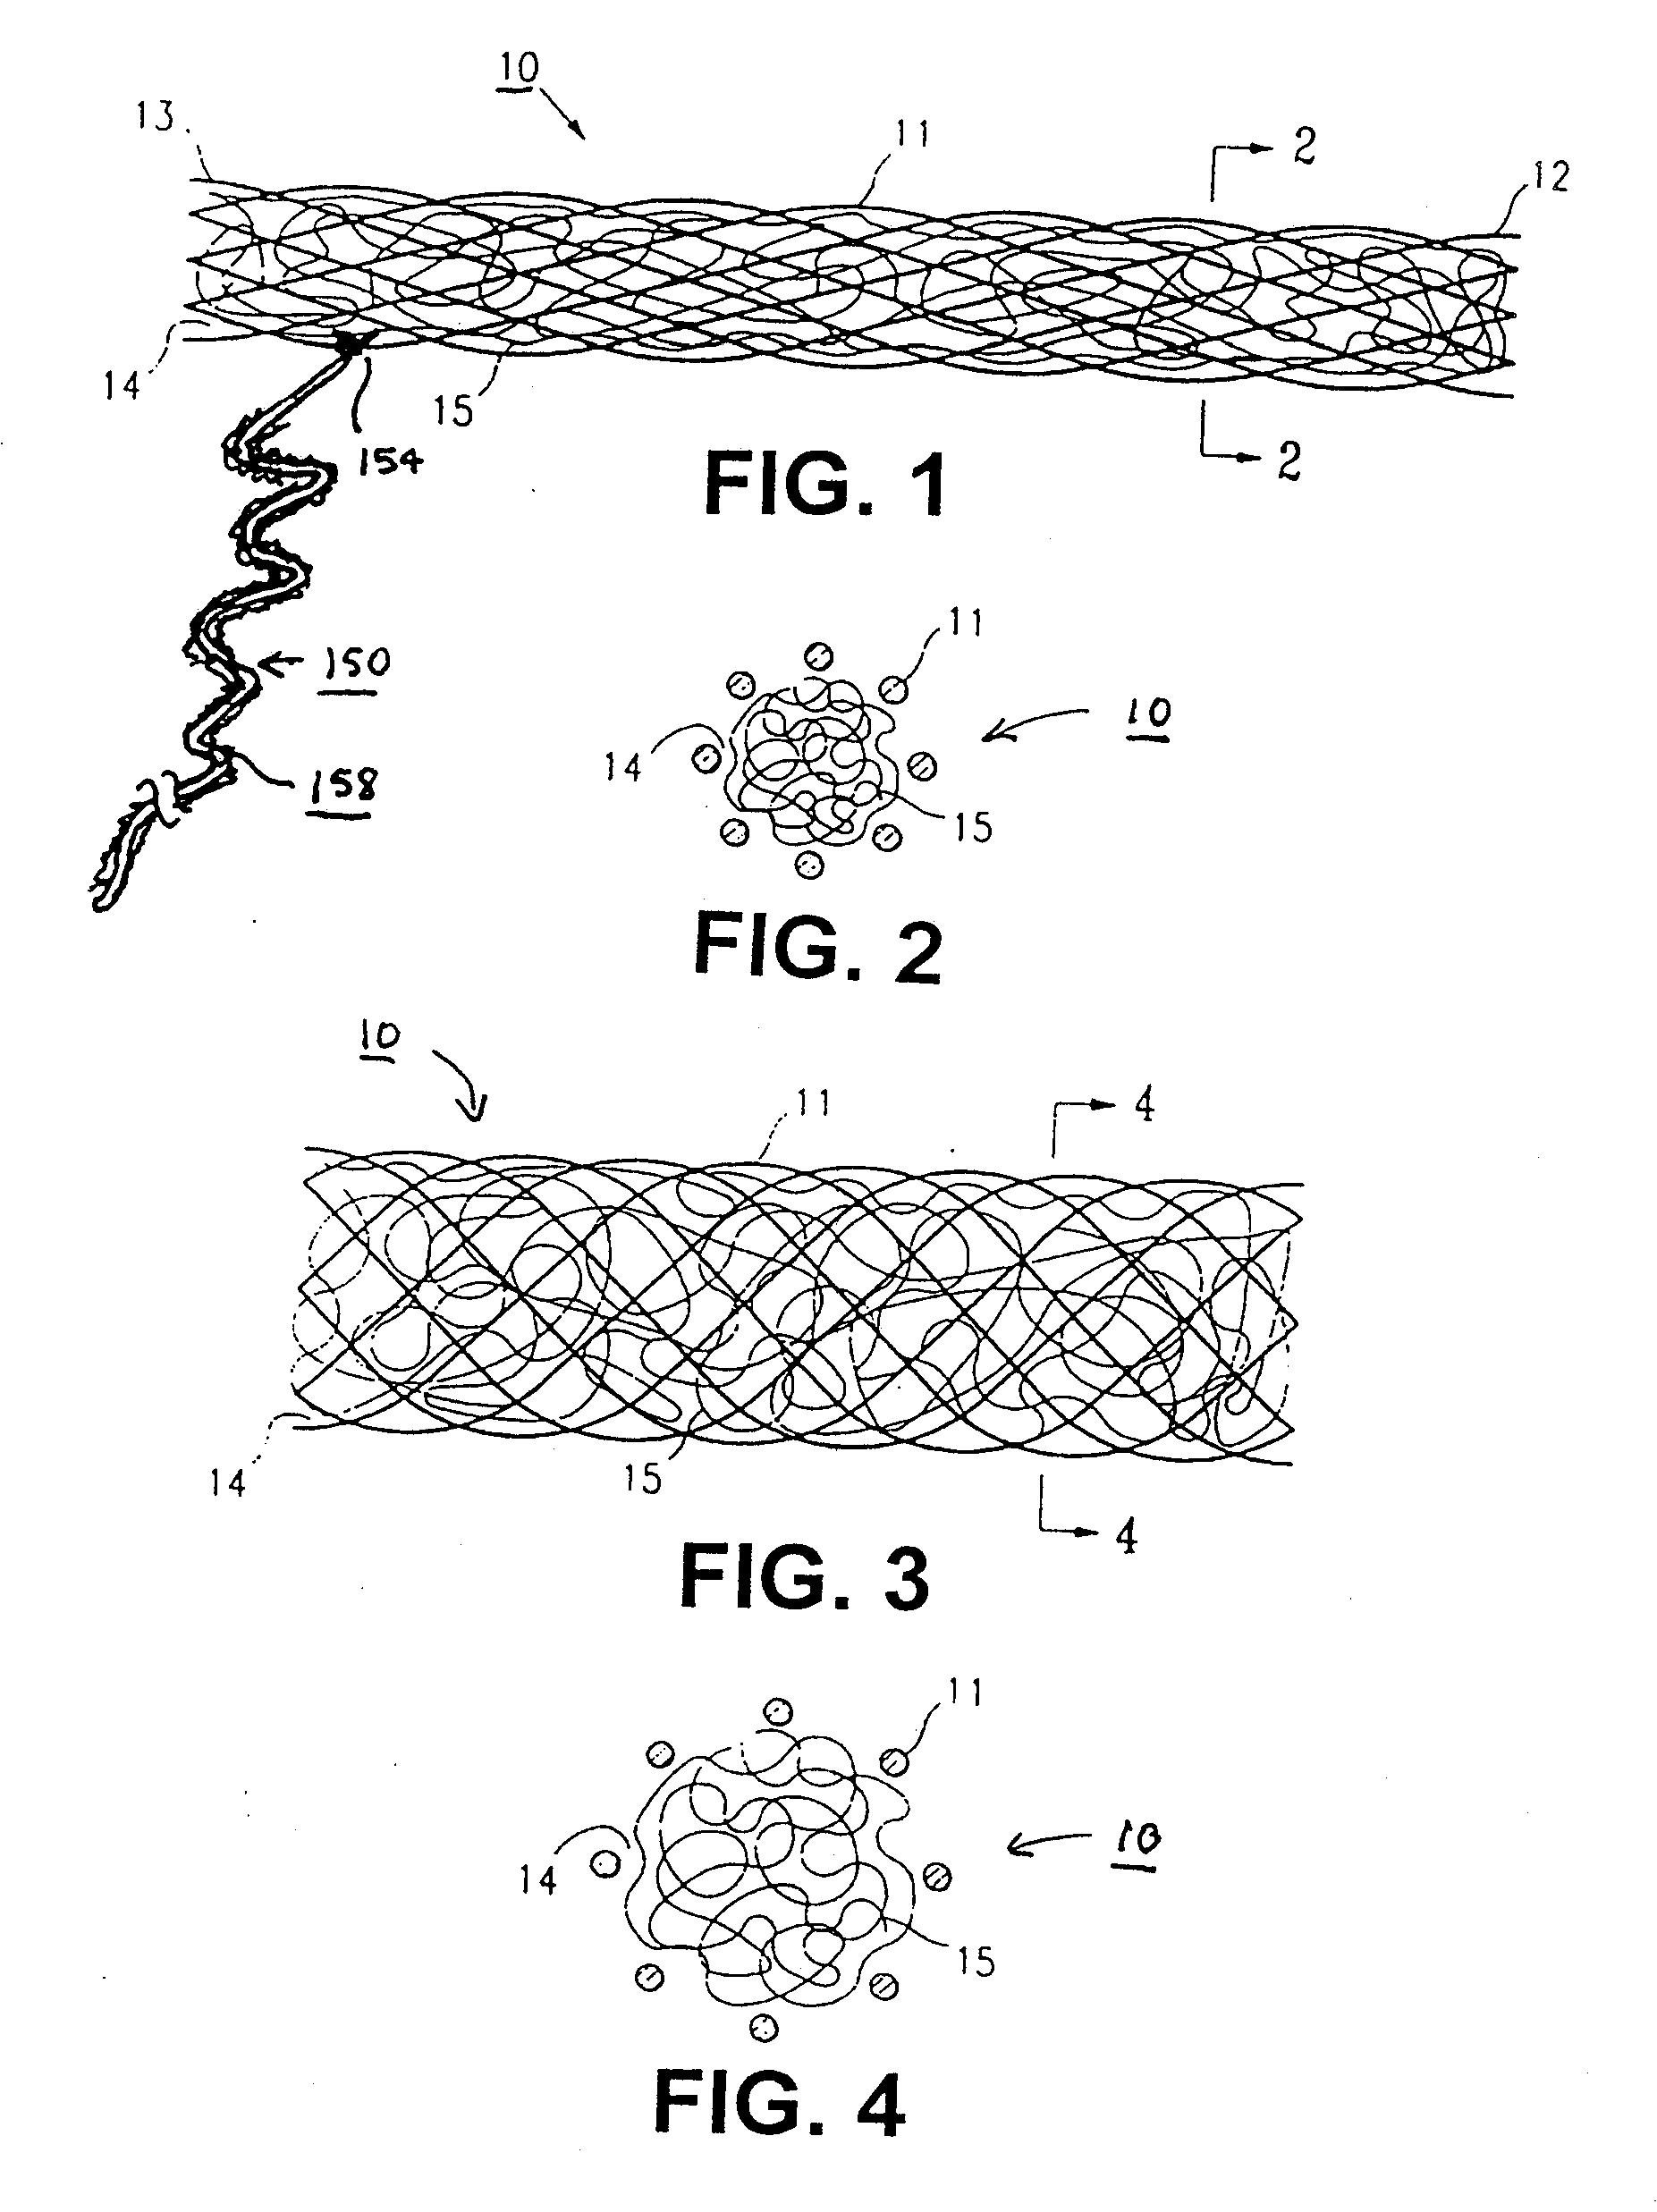 Methods and Apparatus for Occluding Reproductive Tracts to Effect Contraception